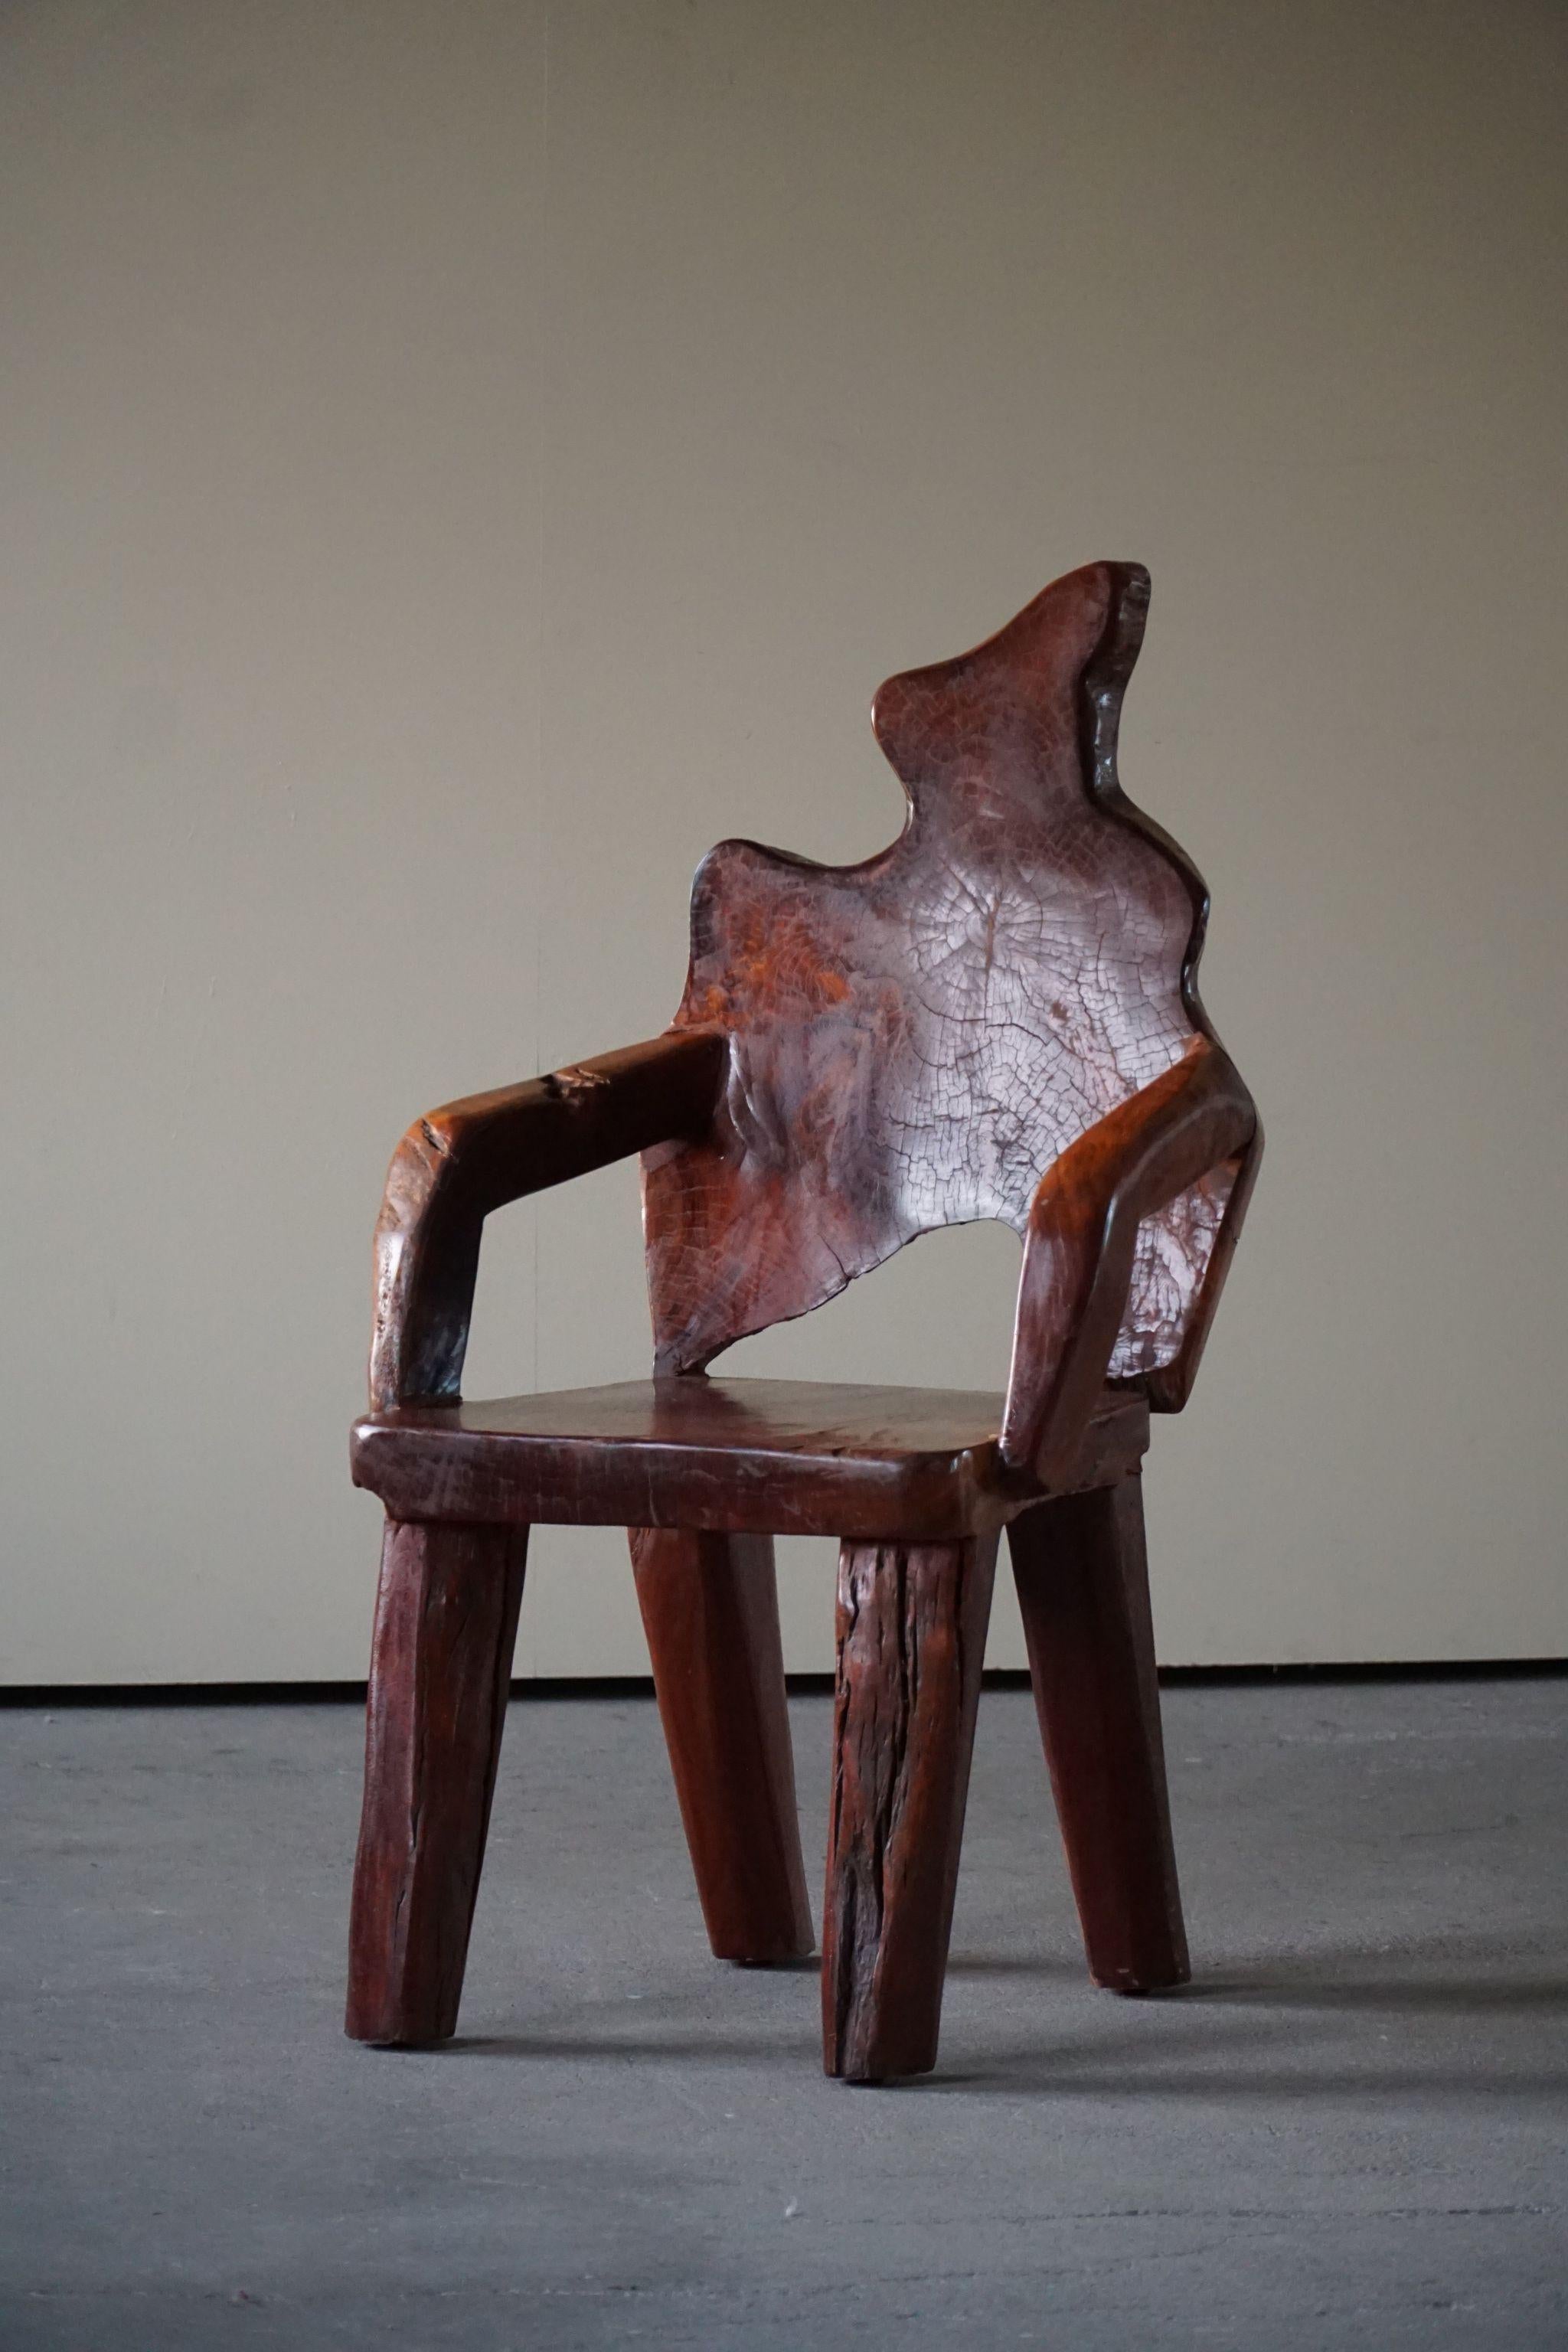 Hand-Crafted Organic Handcrafted Wabi Sabi Chair in Solid Wood, Scandinavian Modern, 1900s